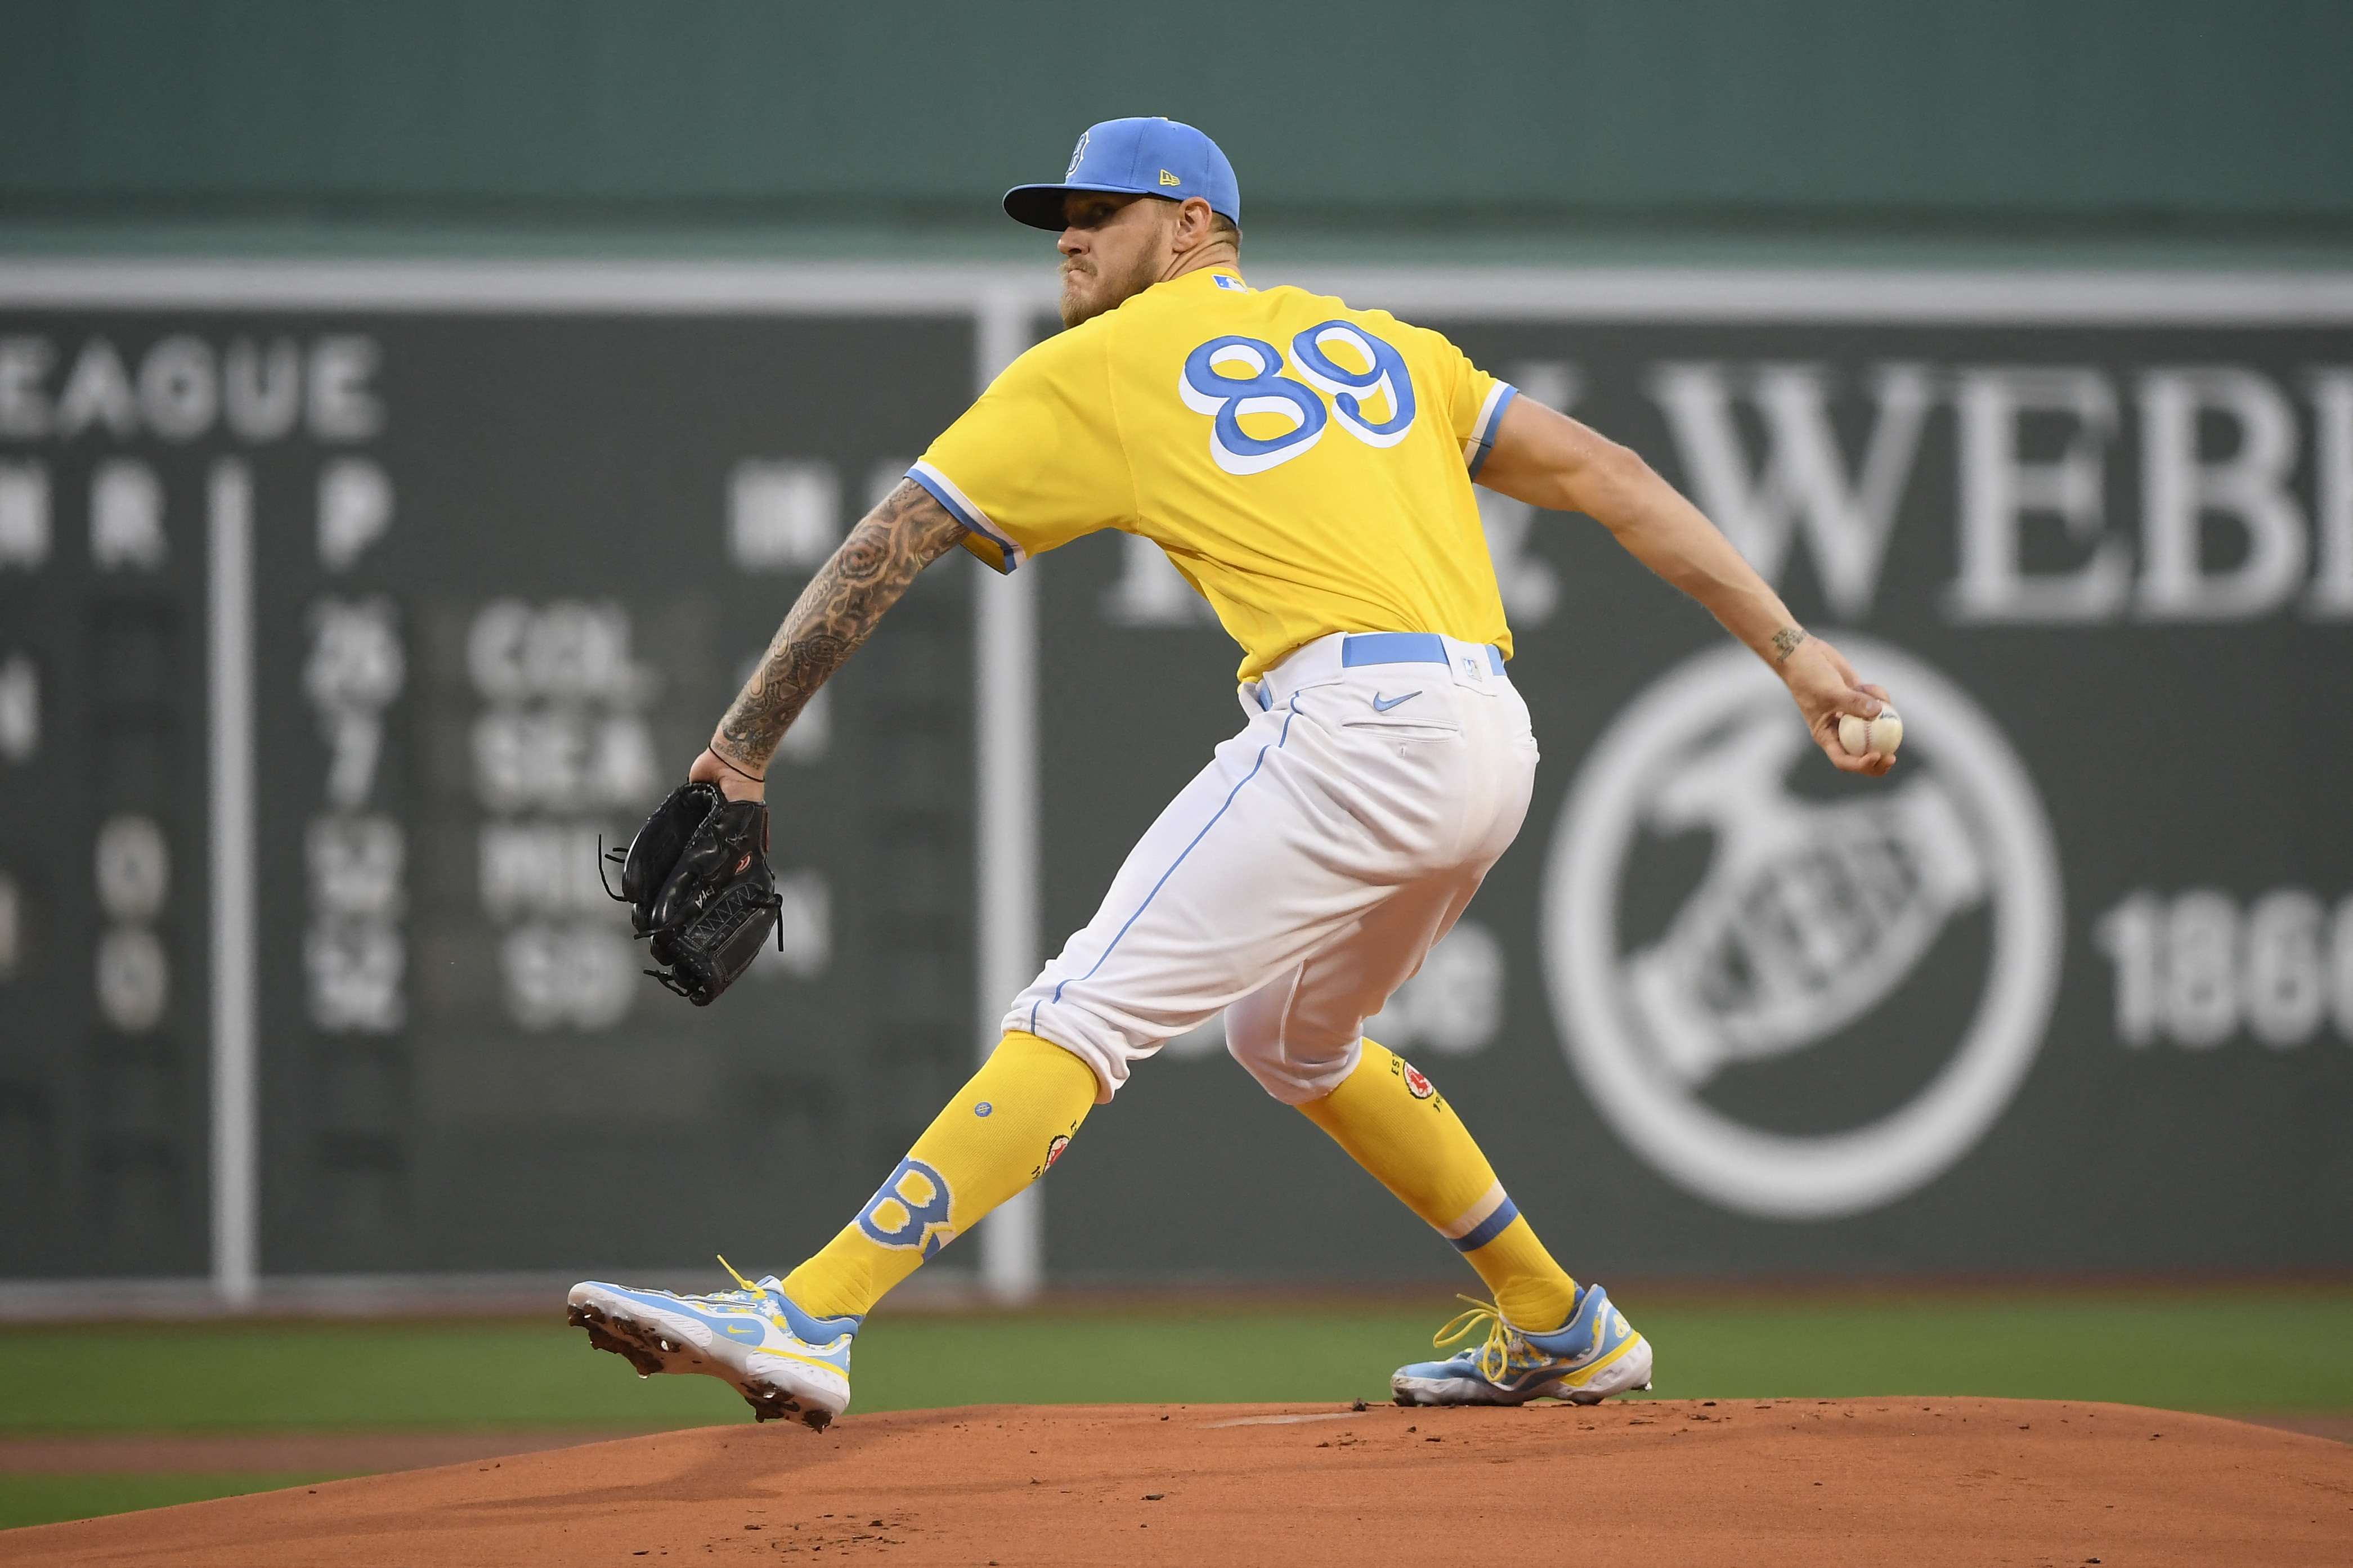 Why are the Boston Red Sox wearing yellow and blue uniforms today?